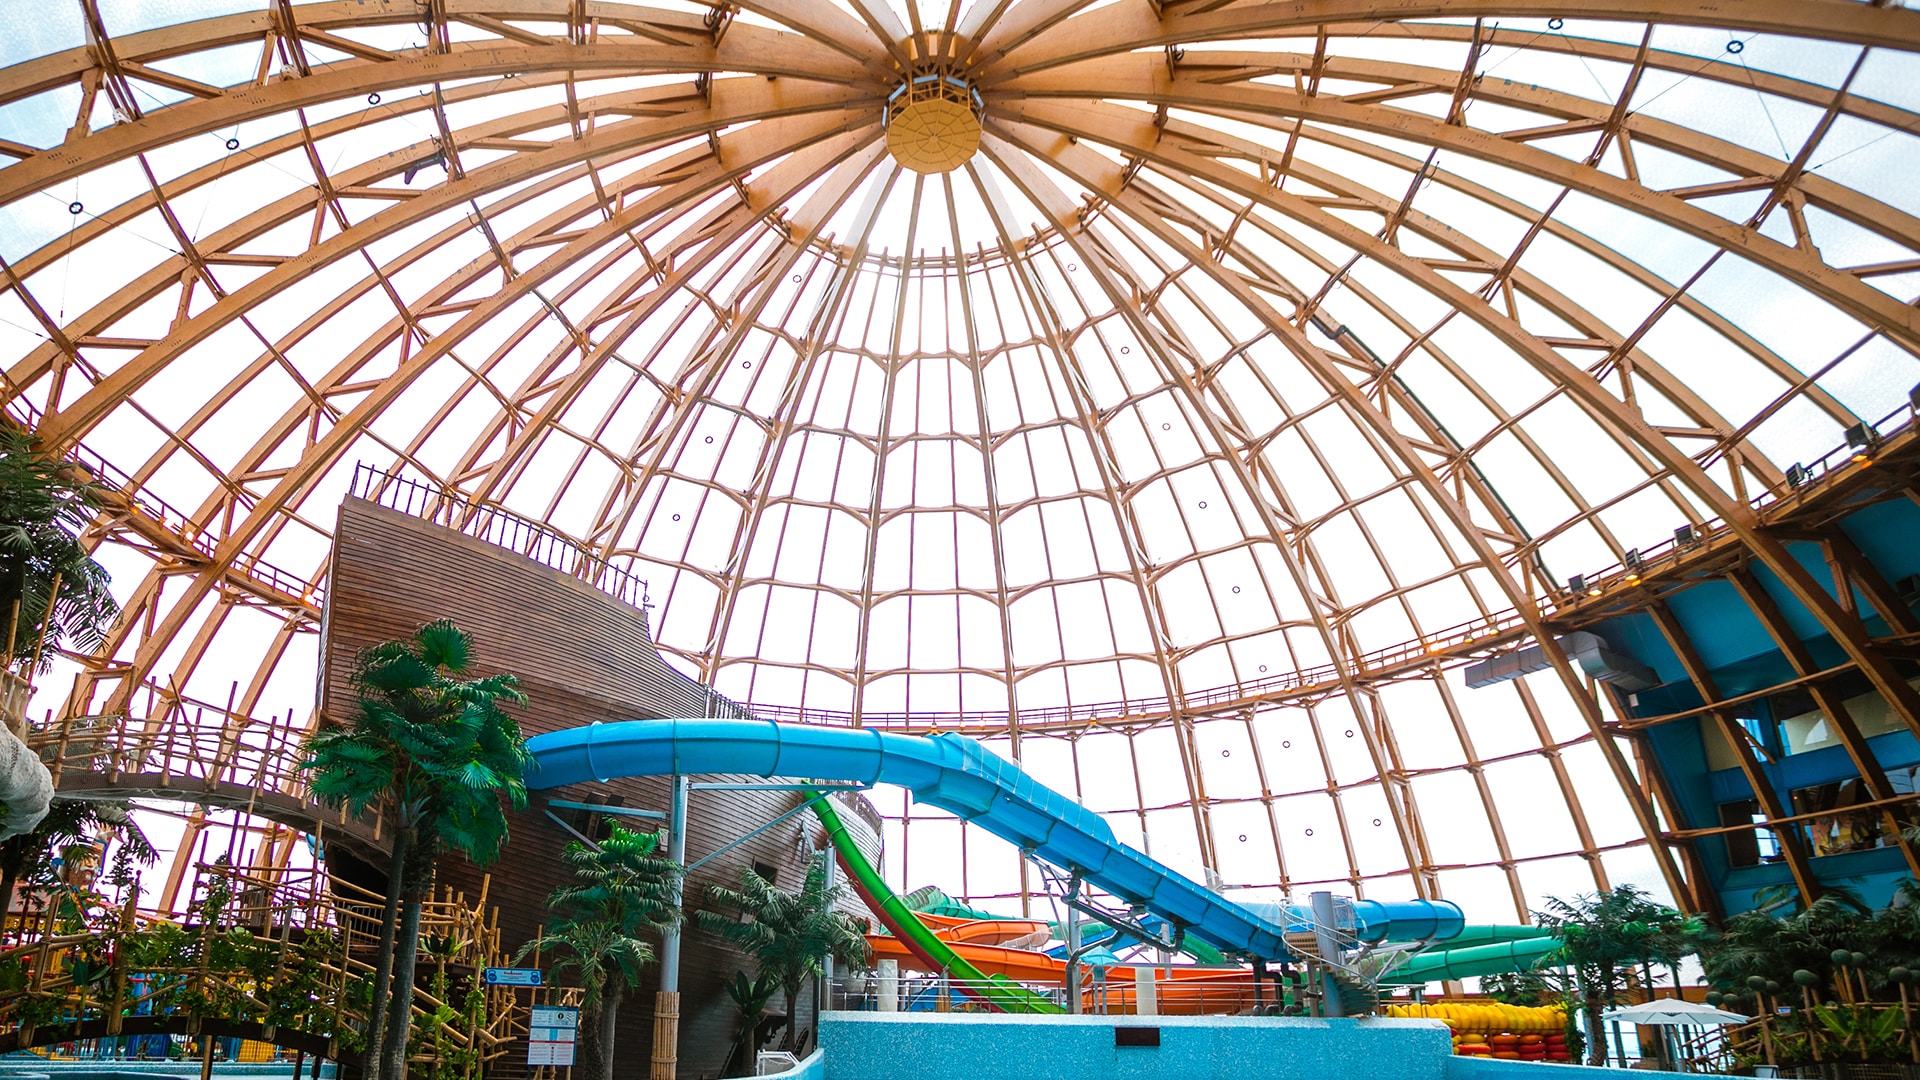 The huge amount of natural daylight coming through the Texlon® ETFE roof elements bathes all of the waterpark attractions in the right amount of light.  